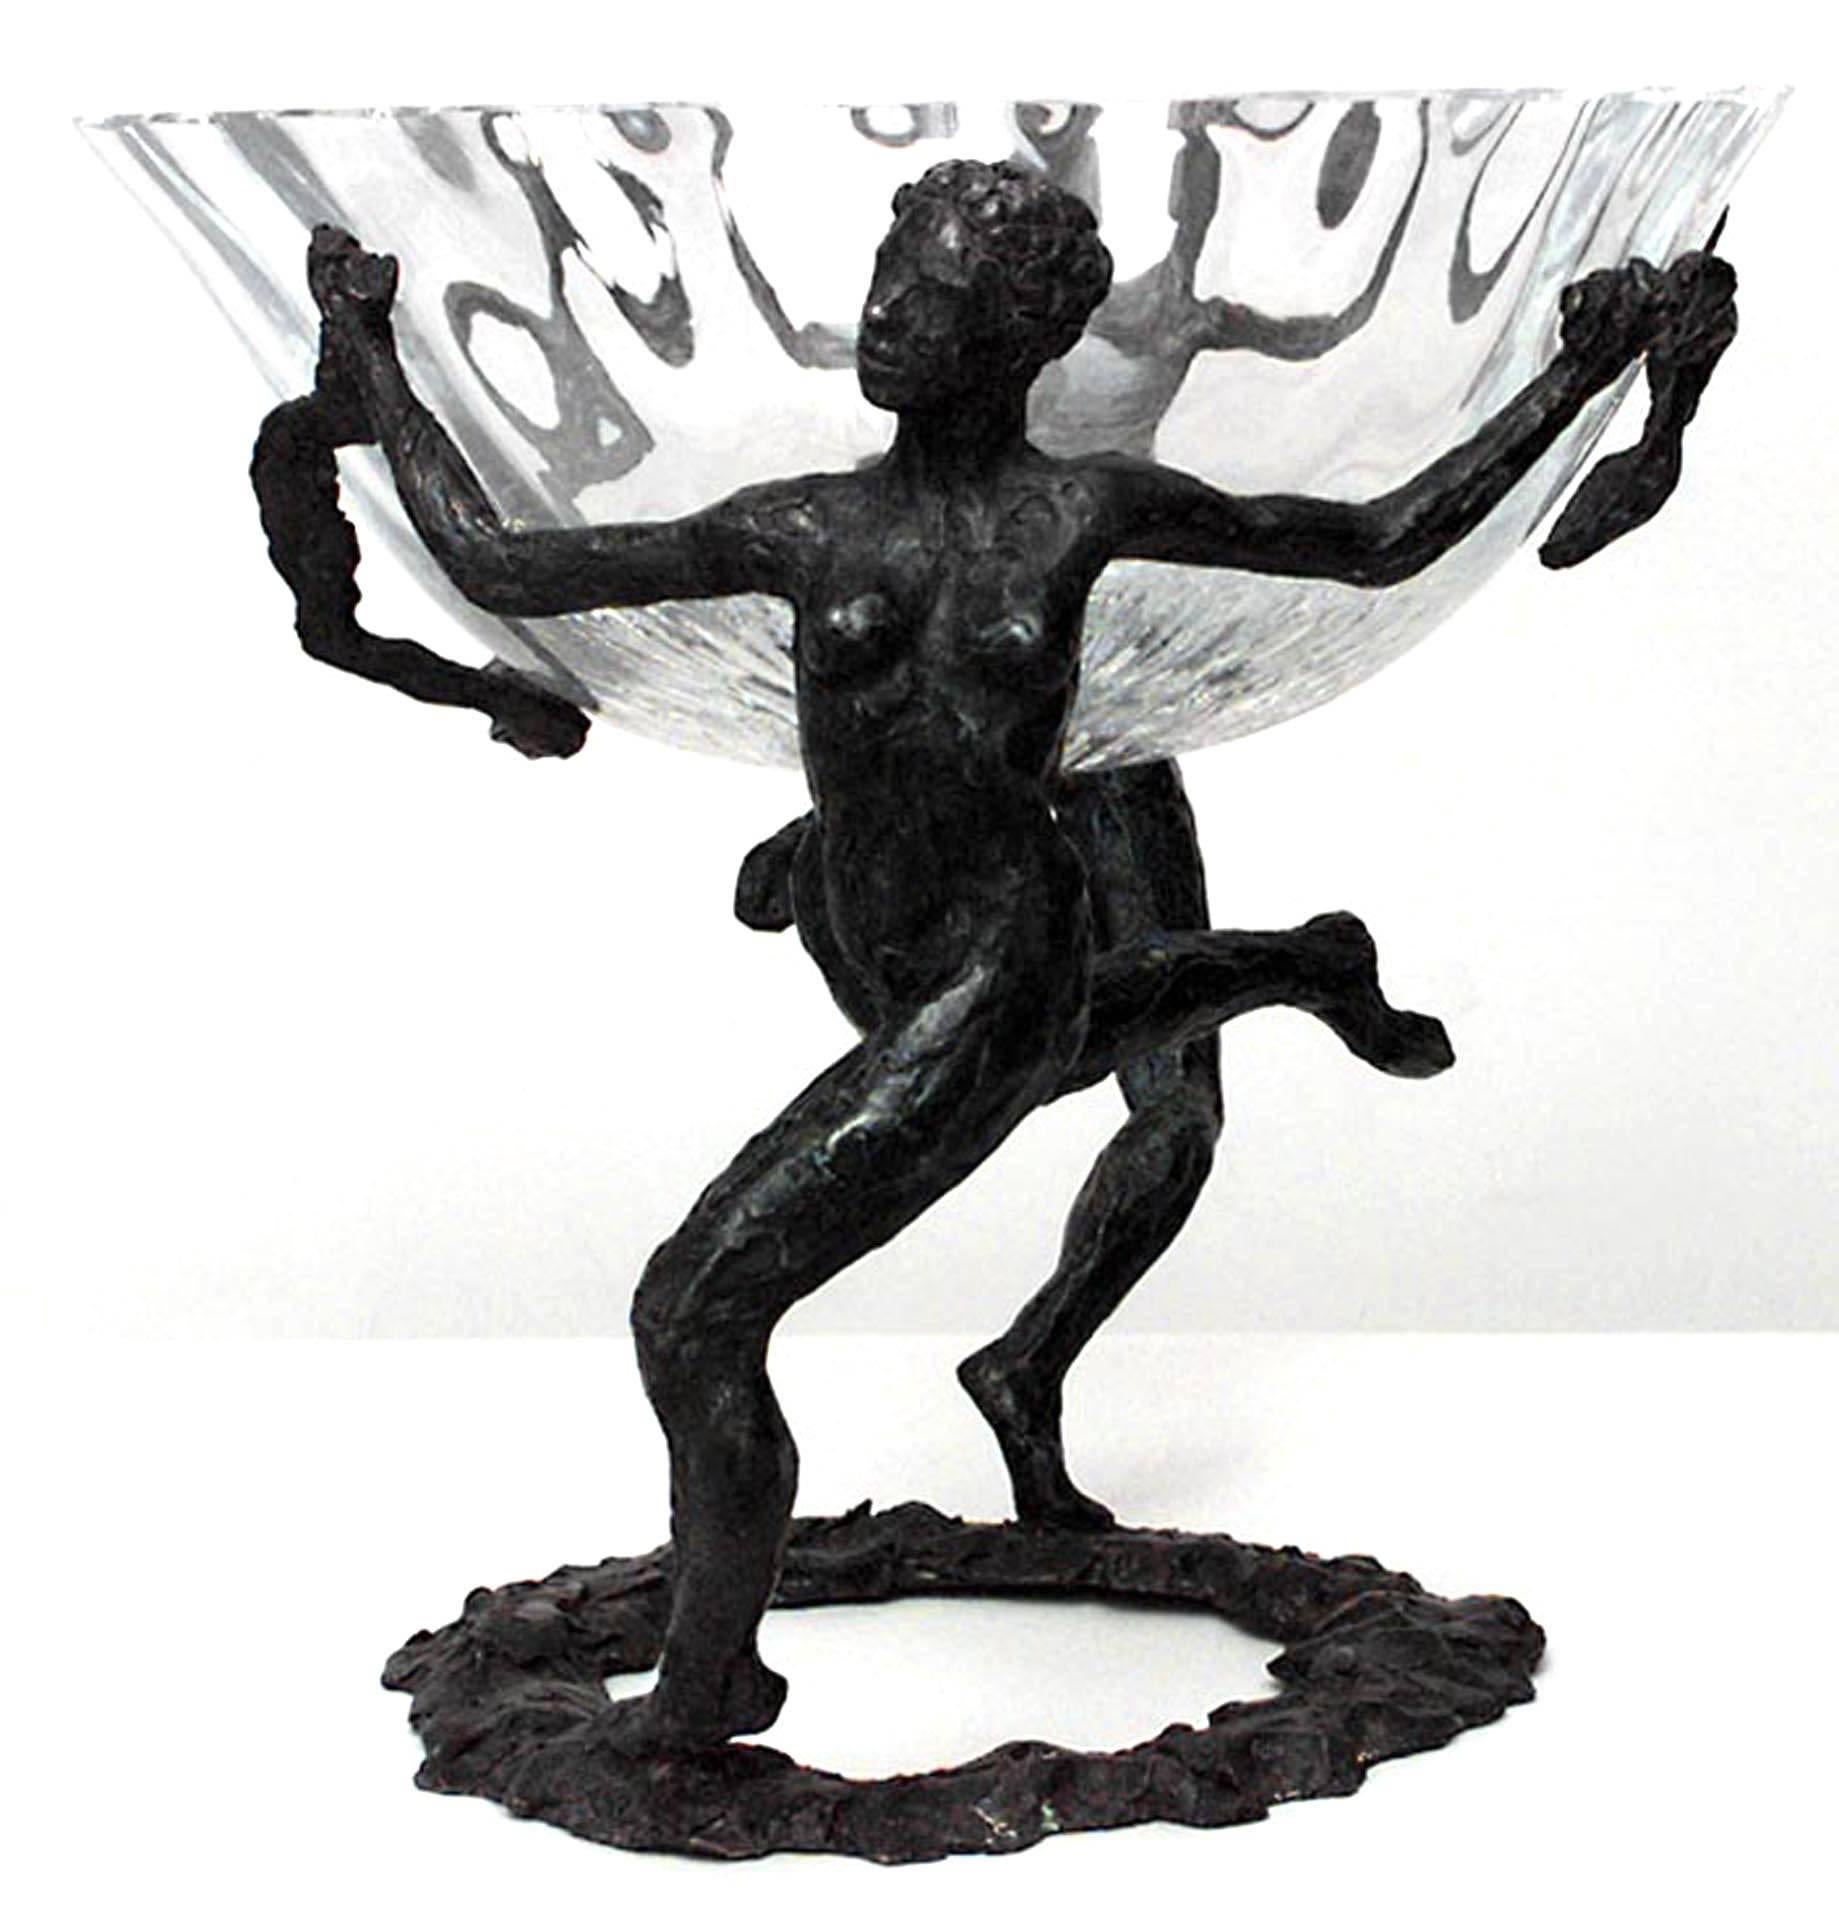 French Art Moderne style bronze centerpiece with 2 female figures holding cut crystal bowl (signed LaROCHE)
